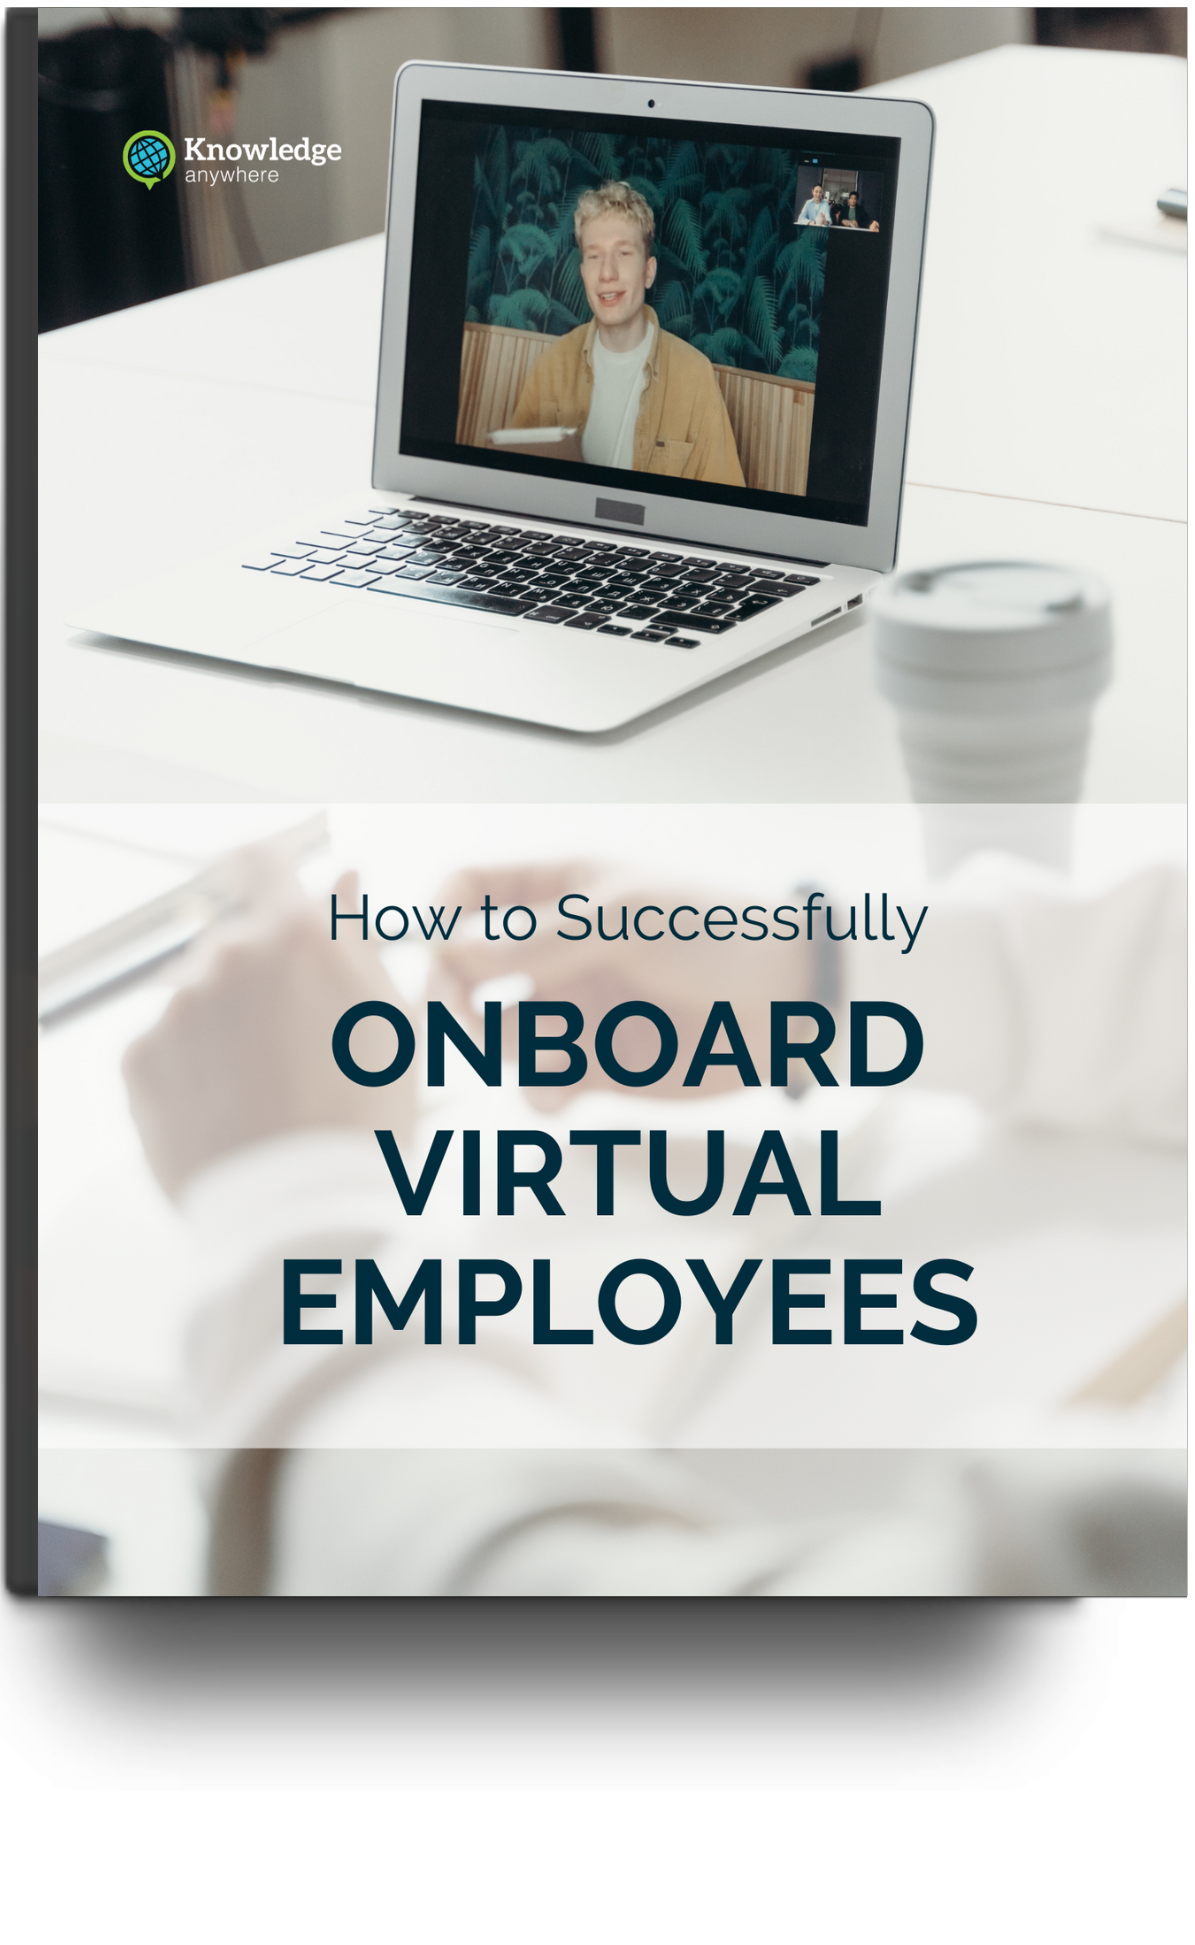  =How to Successfully Onboard Virtual Employees =